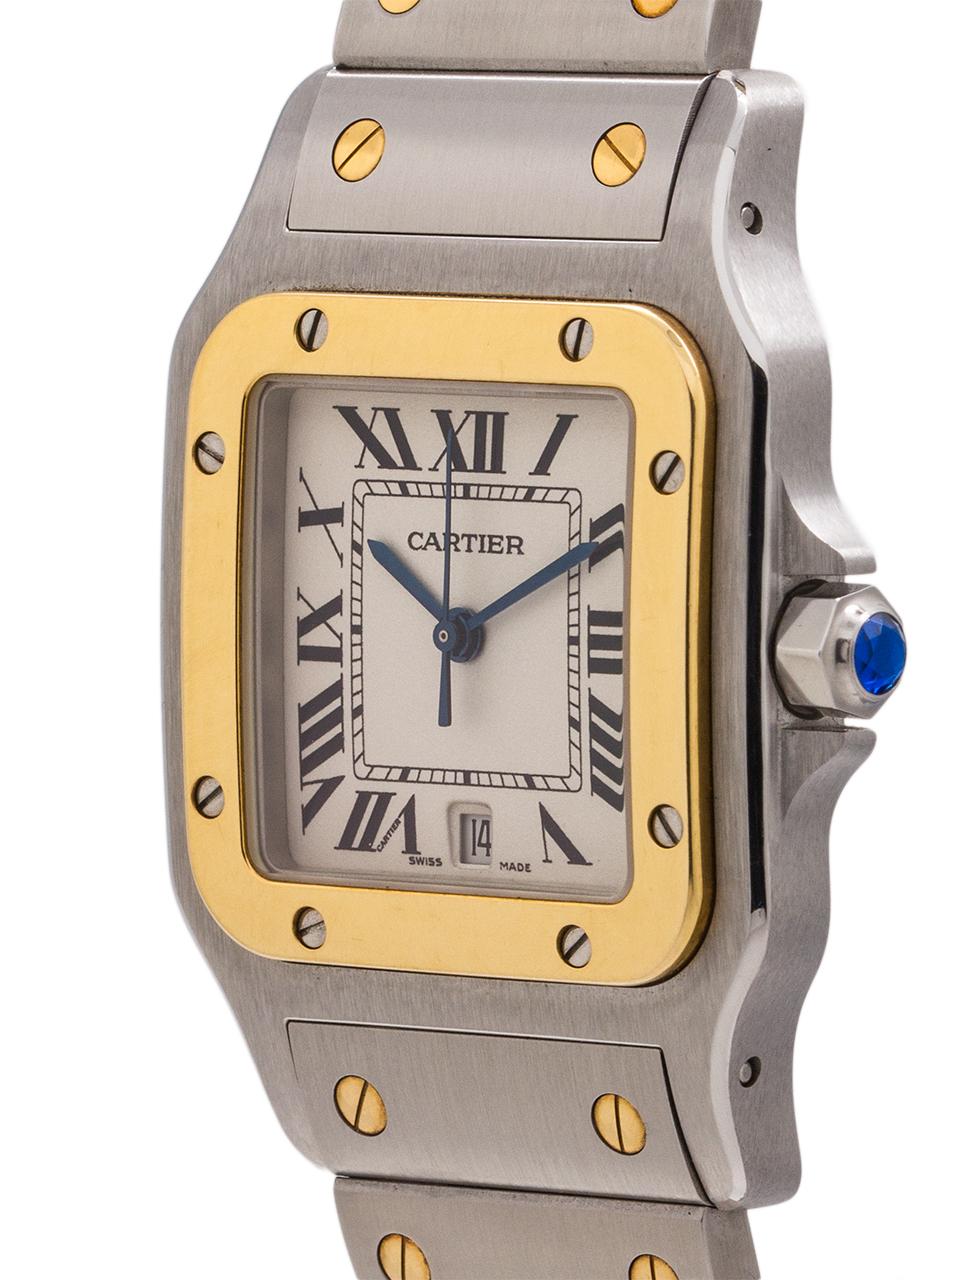 
Exceptional condition man’s Cartier Santos Galbe stainless steel and 18K yellow gold, circa 2000. Featuring a 29 x 41mm ergonomically curved back case, with curved sapphire crystal and curved links to conform to the wrist. Classic white dial with